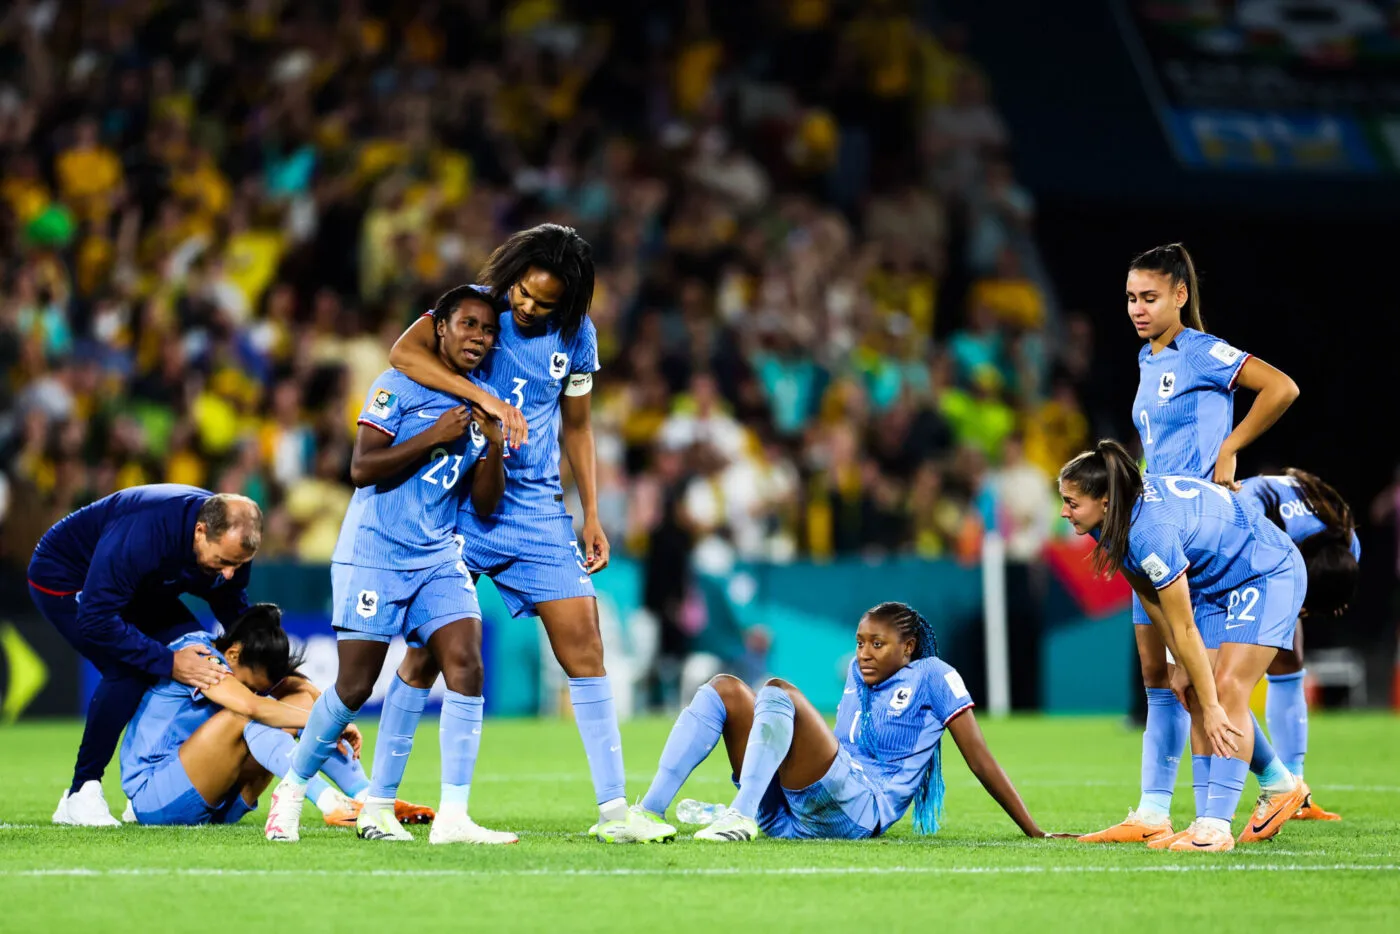 Wendie RENARD, Vicky BECHO, Kadidiatou DIANI, Maelle LAKRAR of France during the Quarter Final match between Australie and France at the 2023 FIFA Women's World Cup on August 12, 2023 in Brisbane, Australia. (Photo by Kev Nagle/Icon Sport)